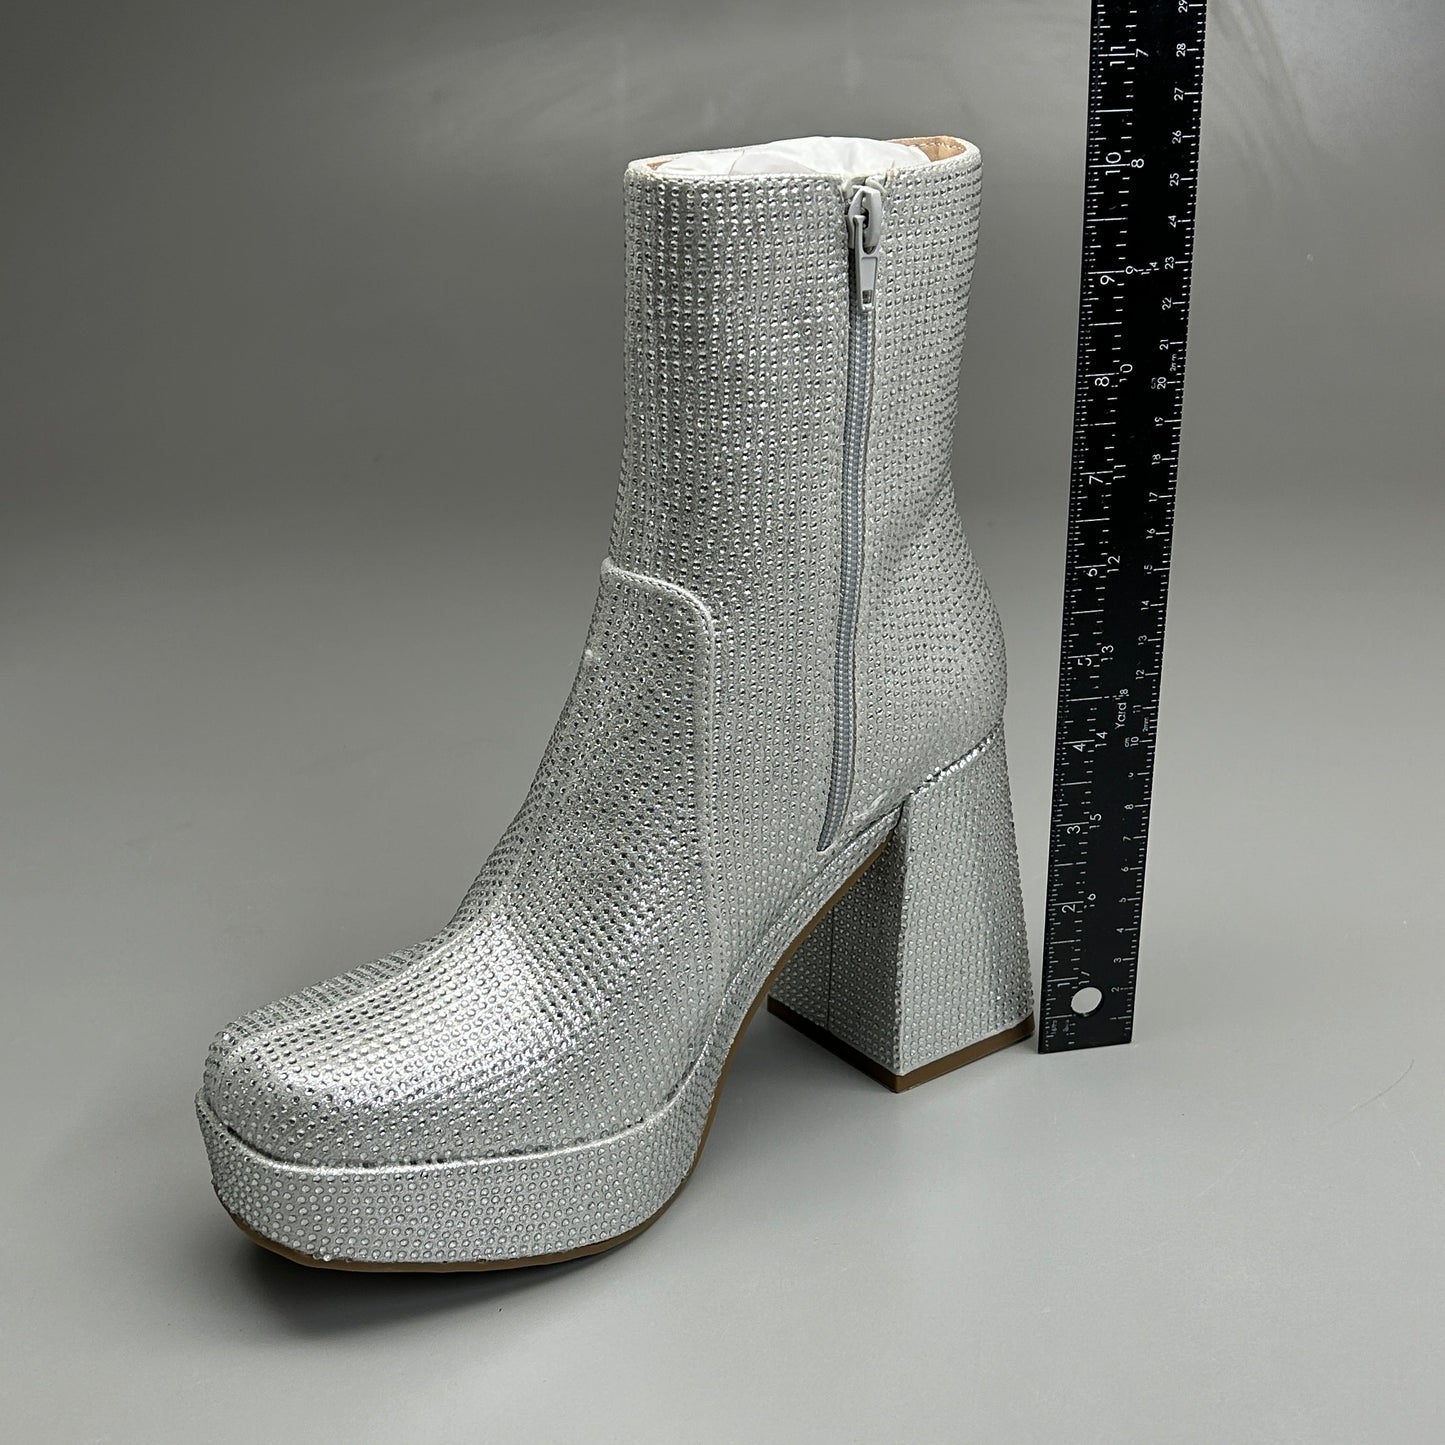 MIA Iva Silver Stone Heeled Boots Women's Sz 8.5 Silver GS1253108 (New)